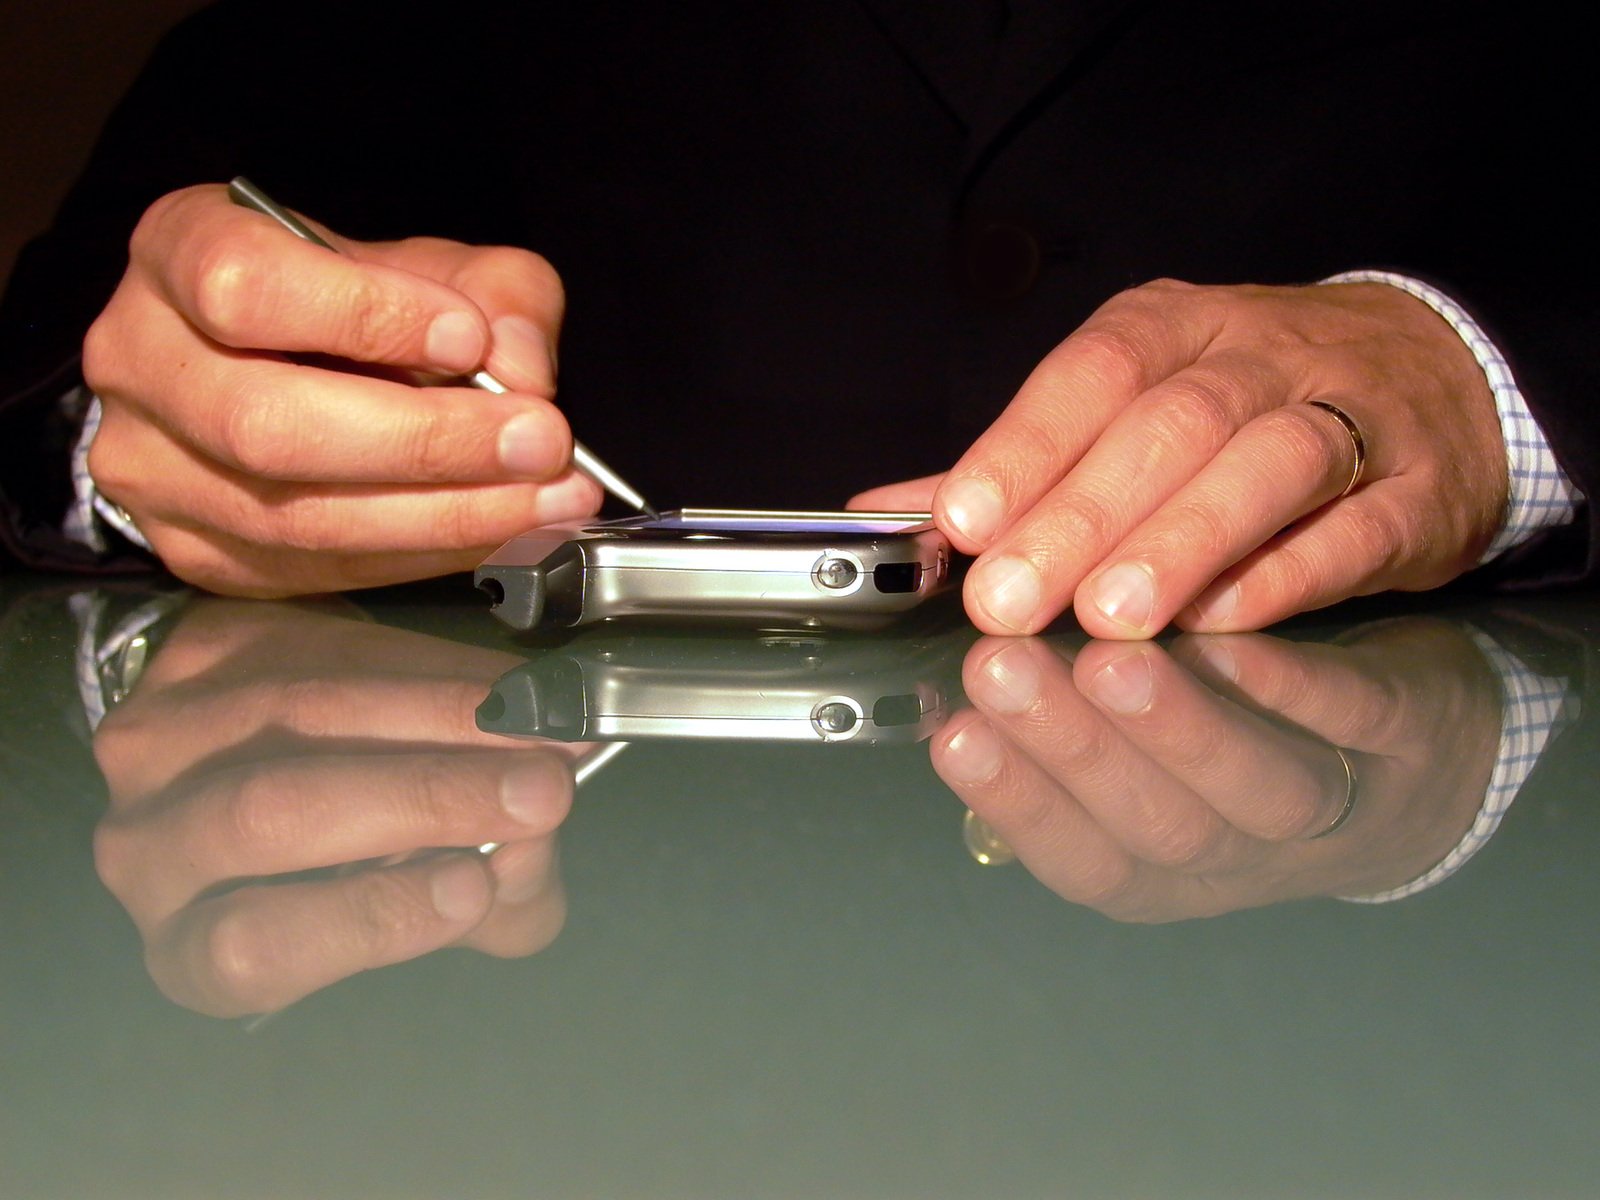 two hands hold a cell phone on top of a table